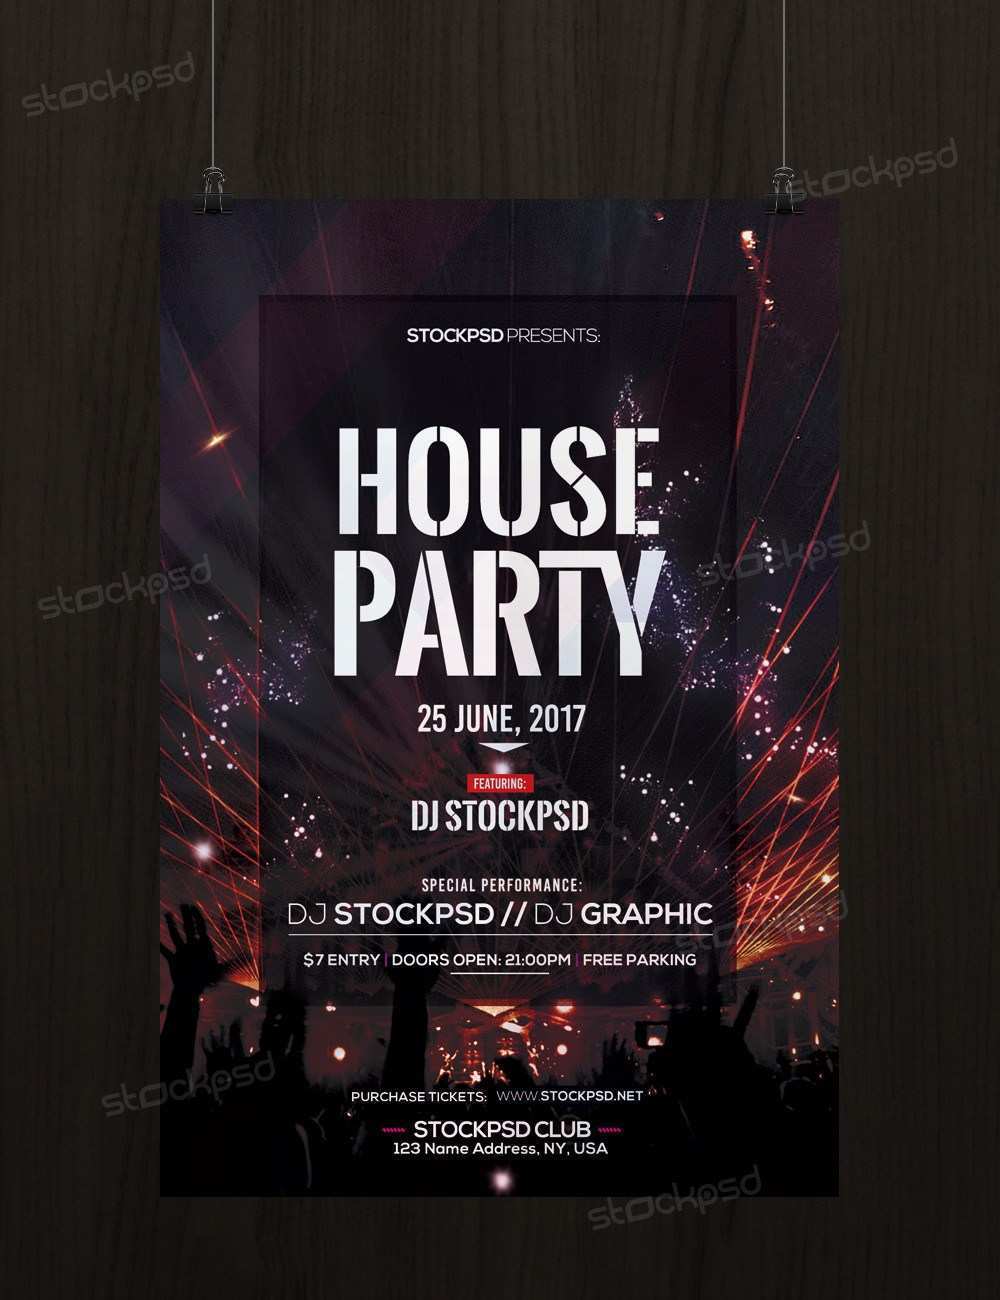 Download 56 The Best Free Psd Party Flyer Templates In Photoshop For Free Psd Party Flyer Templates Cards Design Templates PSD Mockup Templates